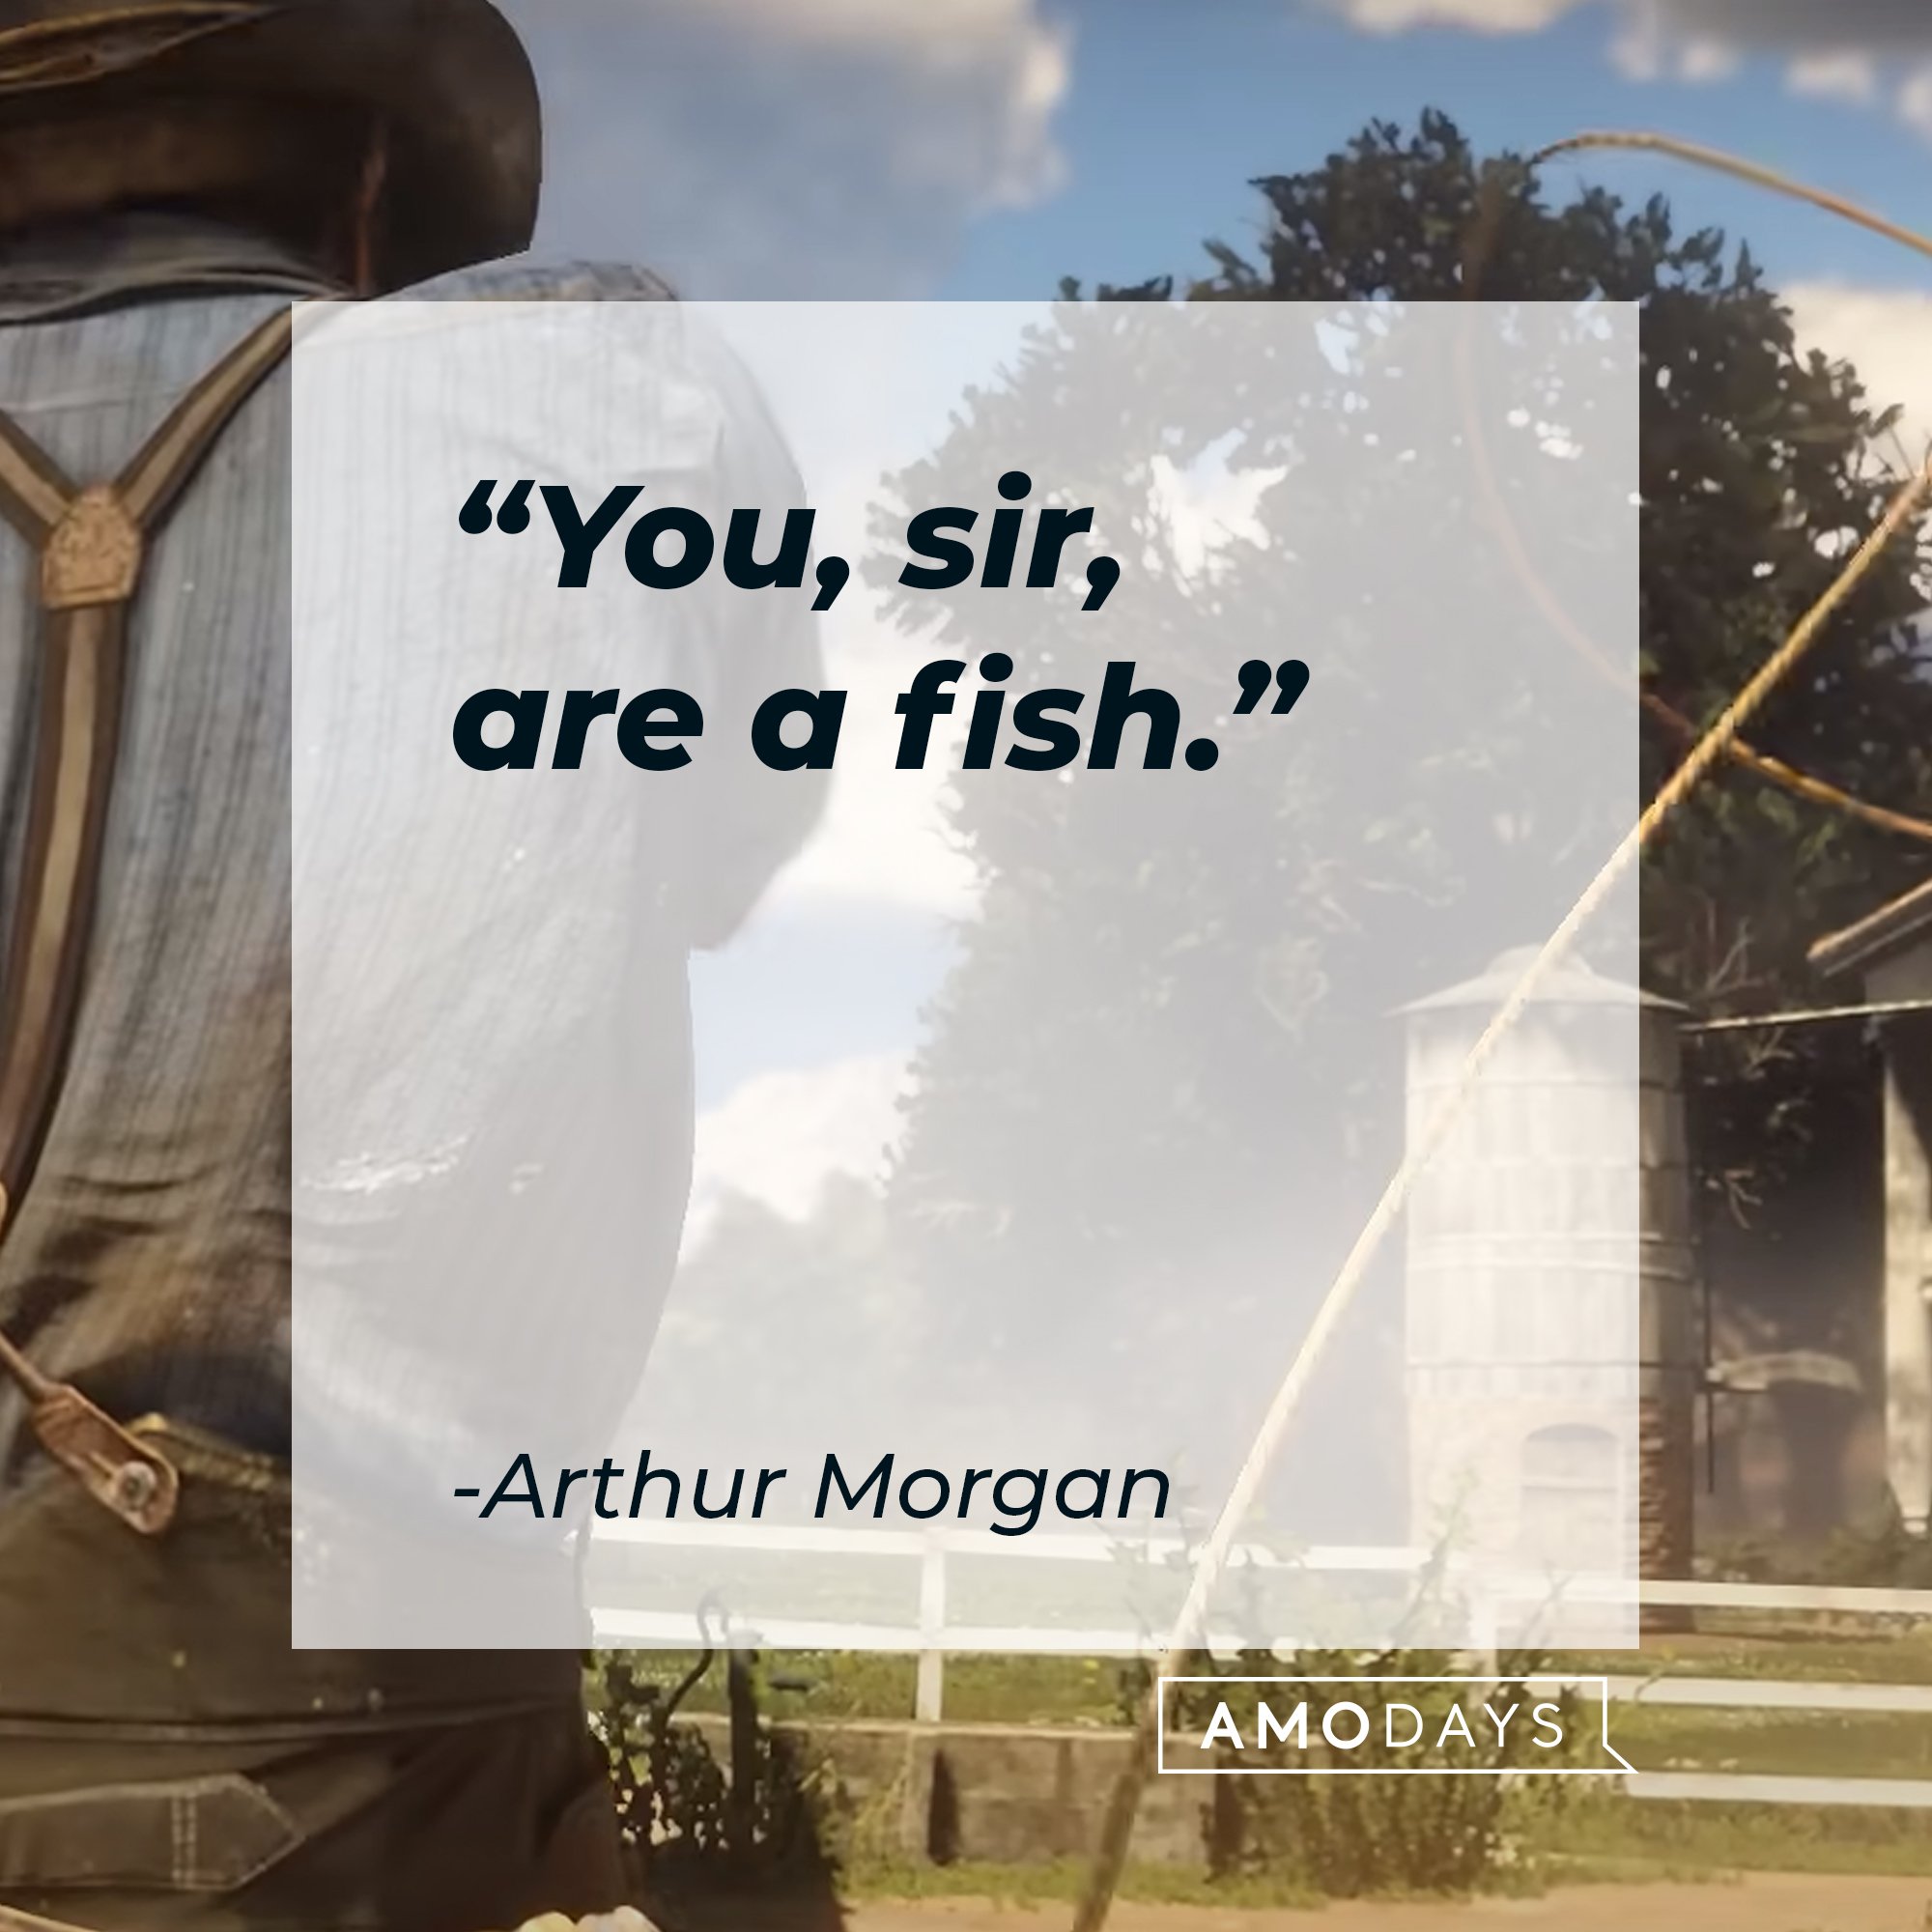 Arthur Morgan's quote: "You, sir, are a fish." | Image: AmoDays